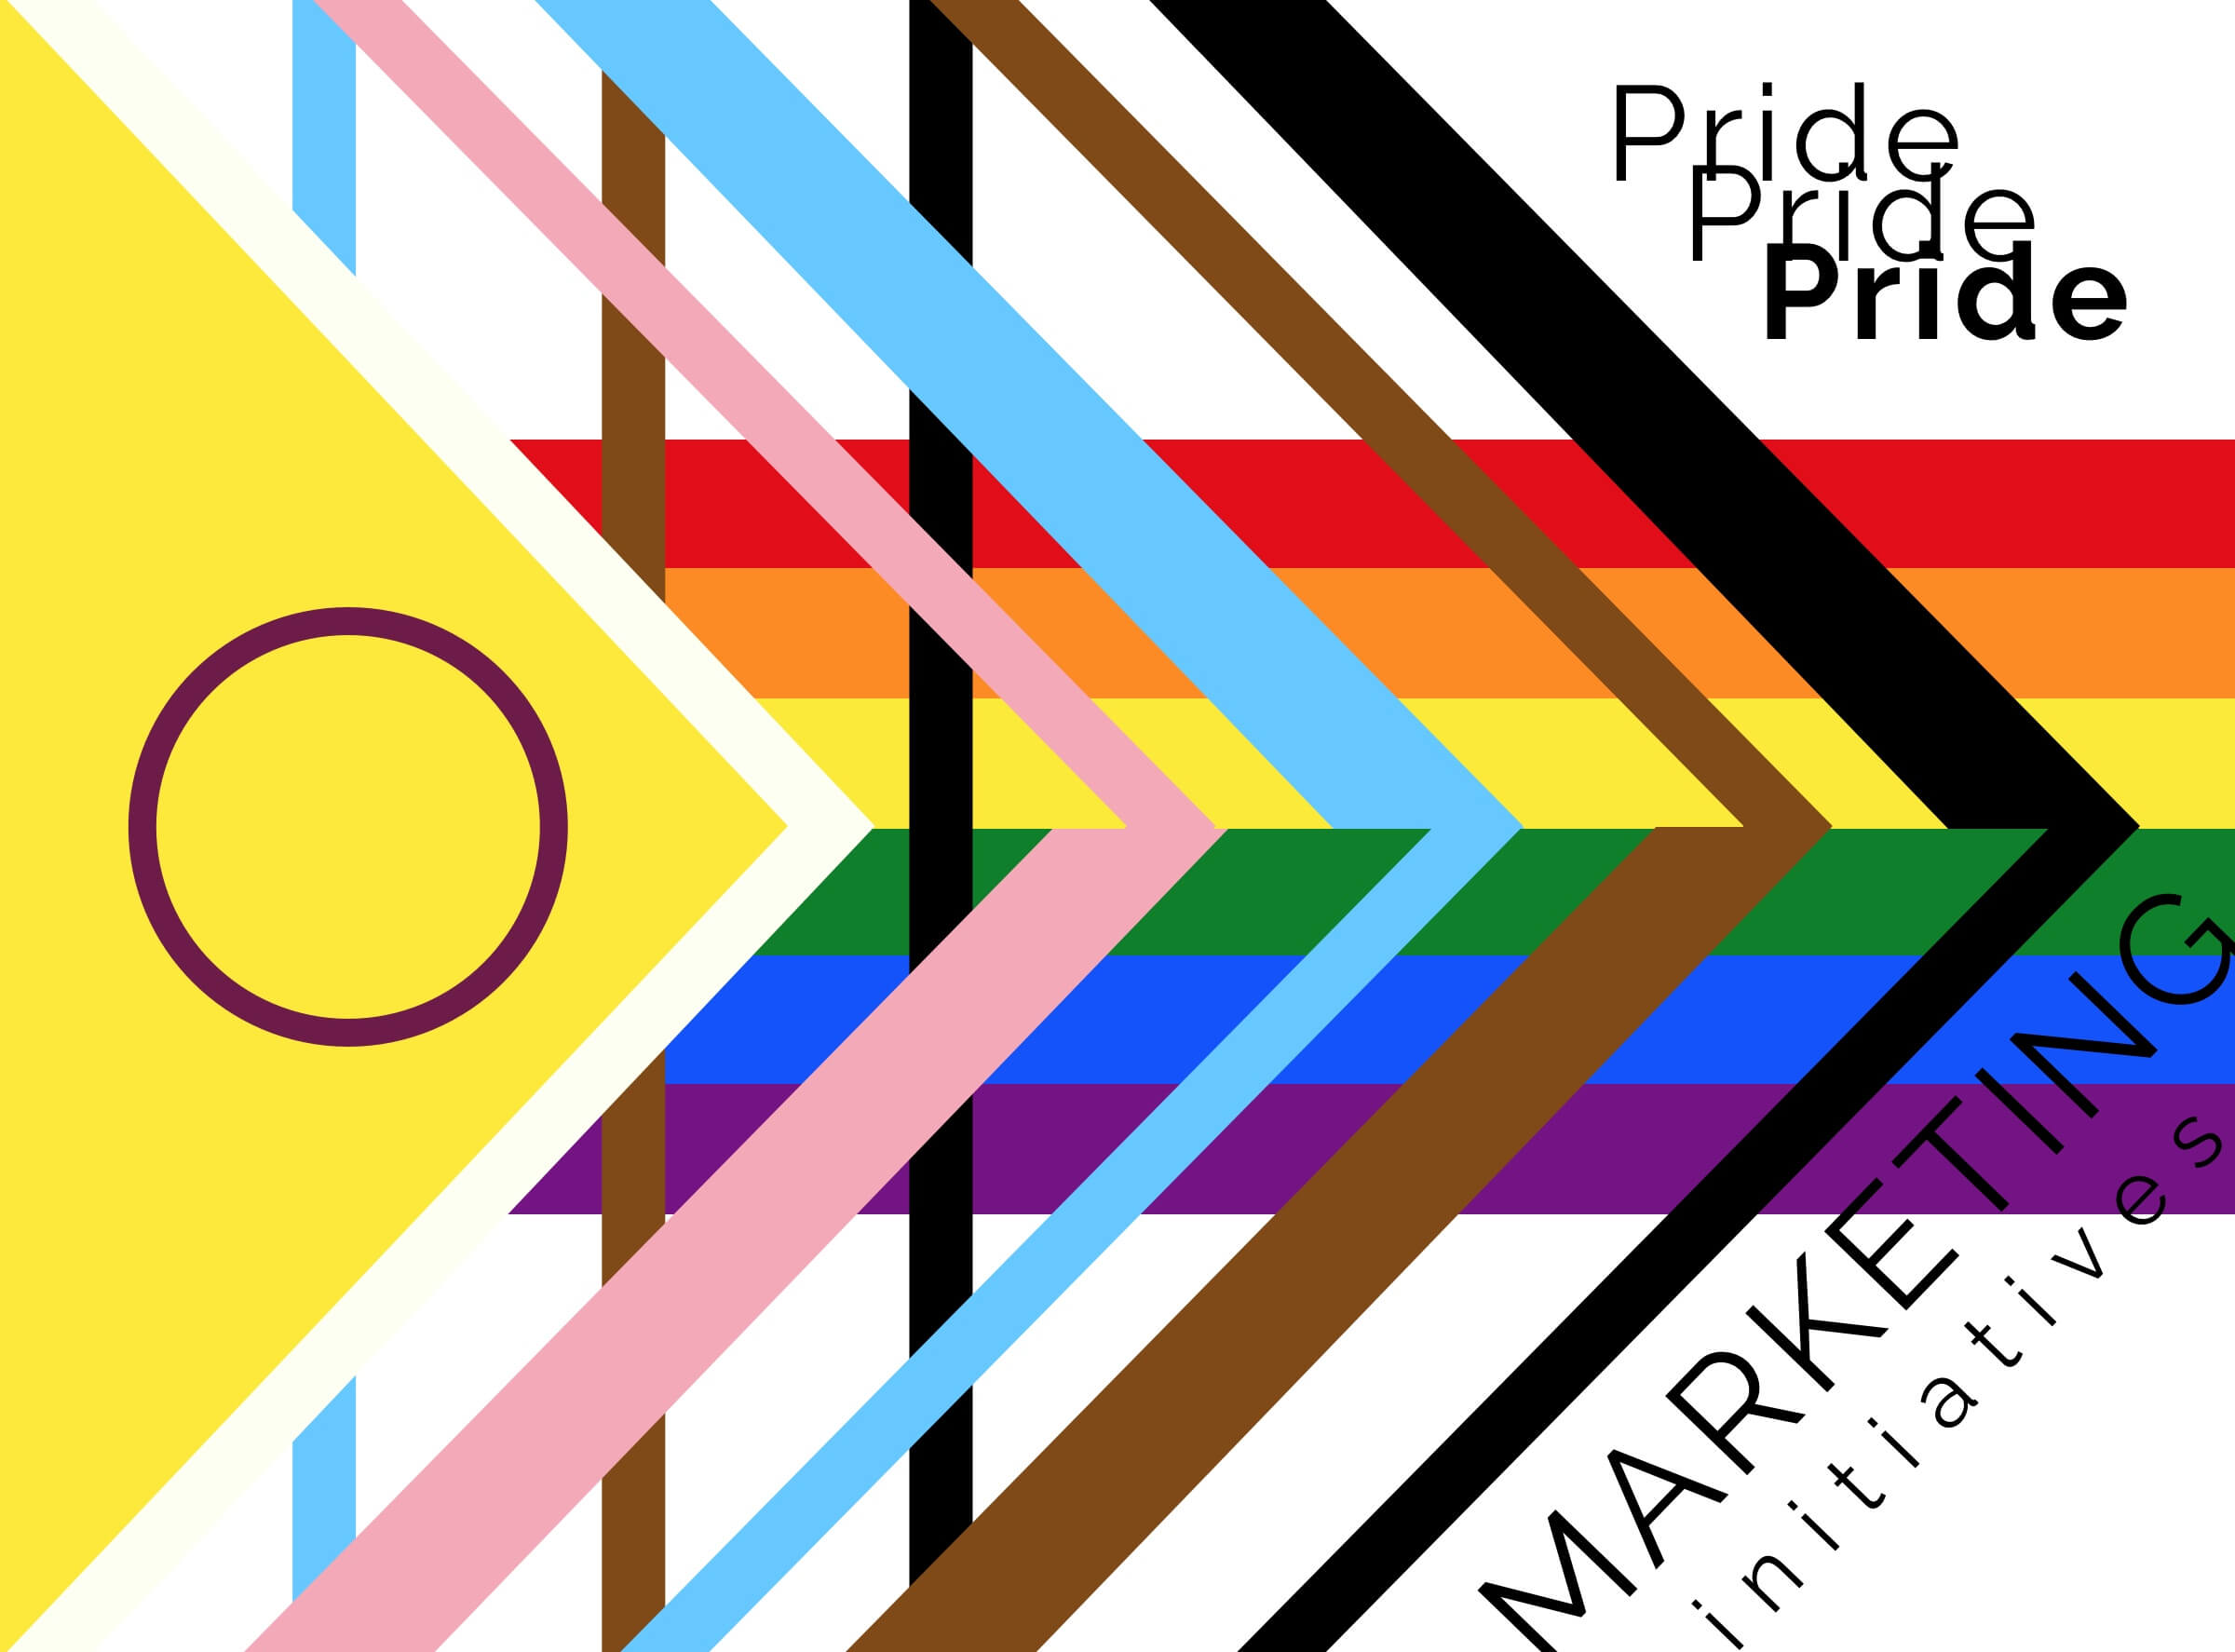 It's Pride Month! Marketing initiatives in support of the community